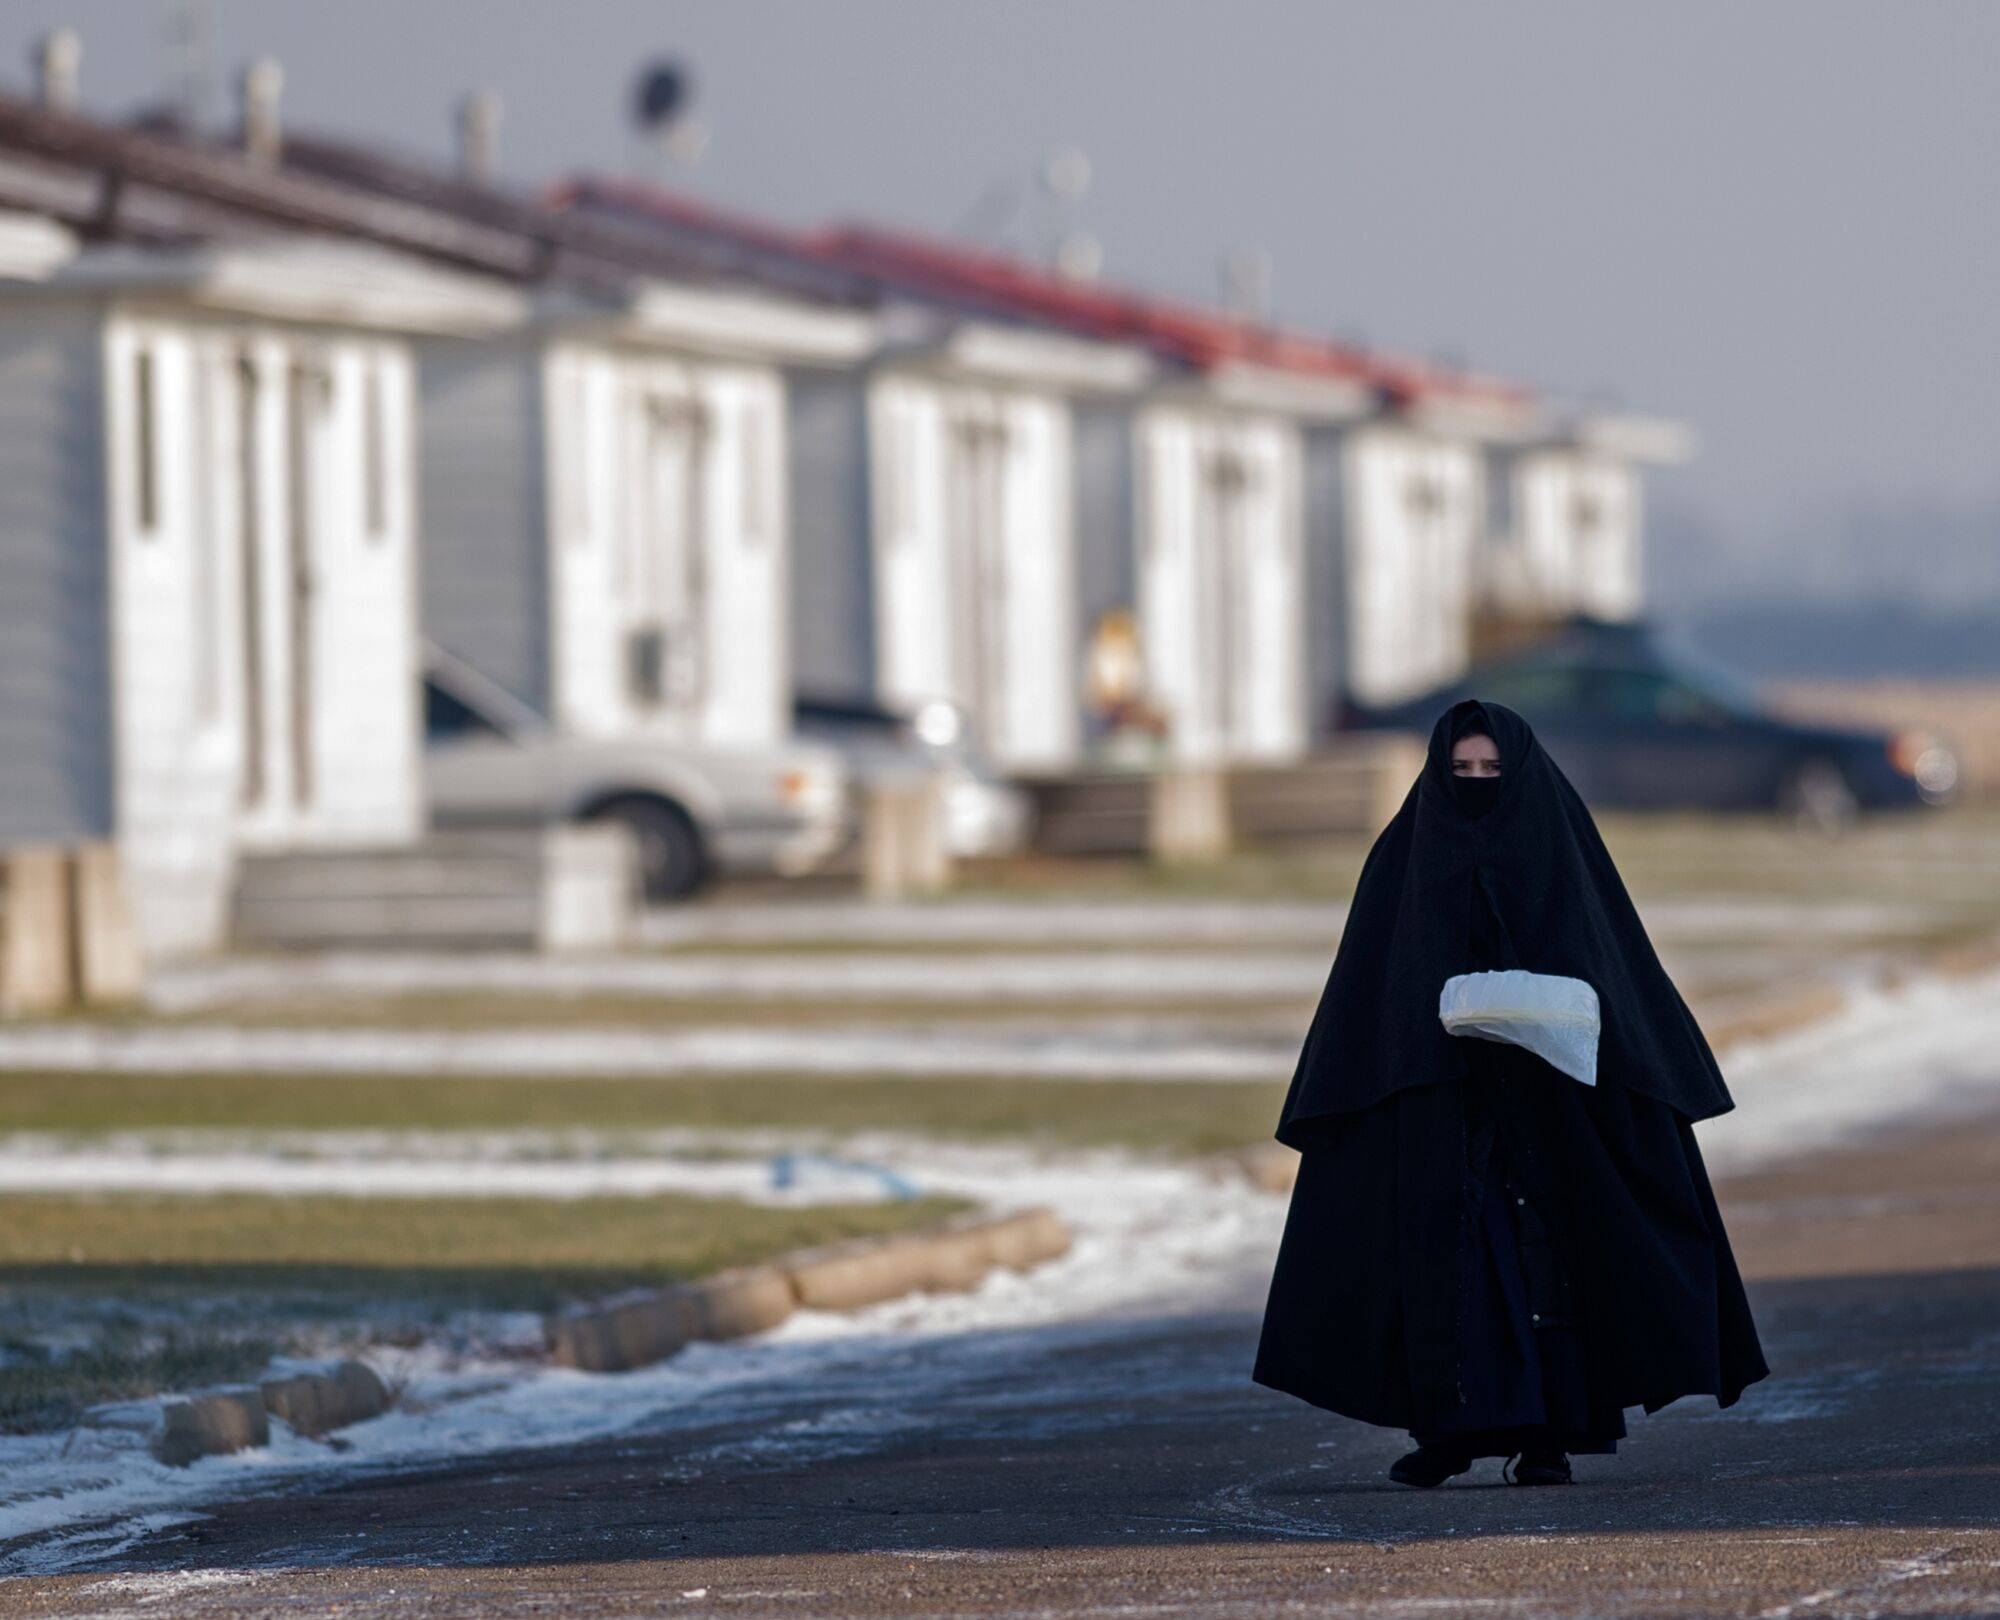 A woman wearing a flowing black robe and head covering walks past homes on the left, with snow on the ground